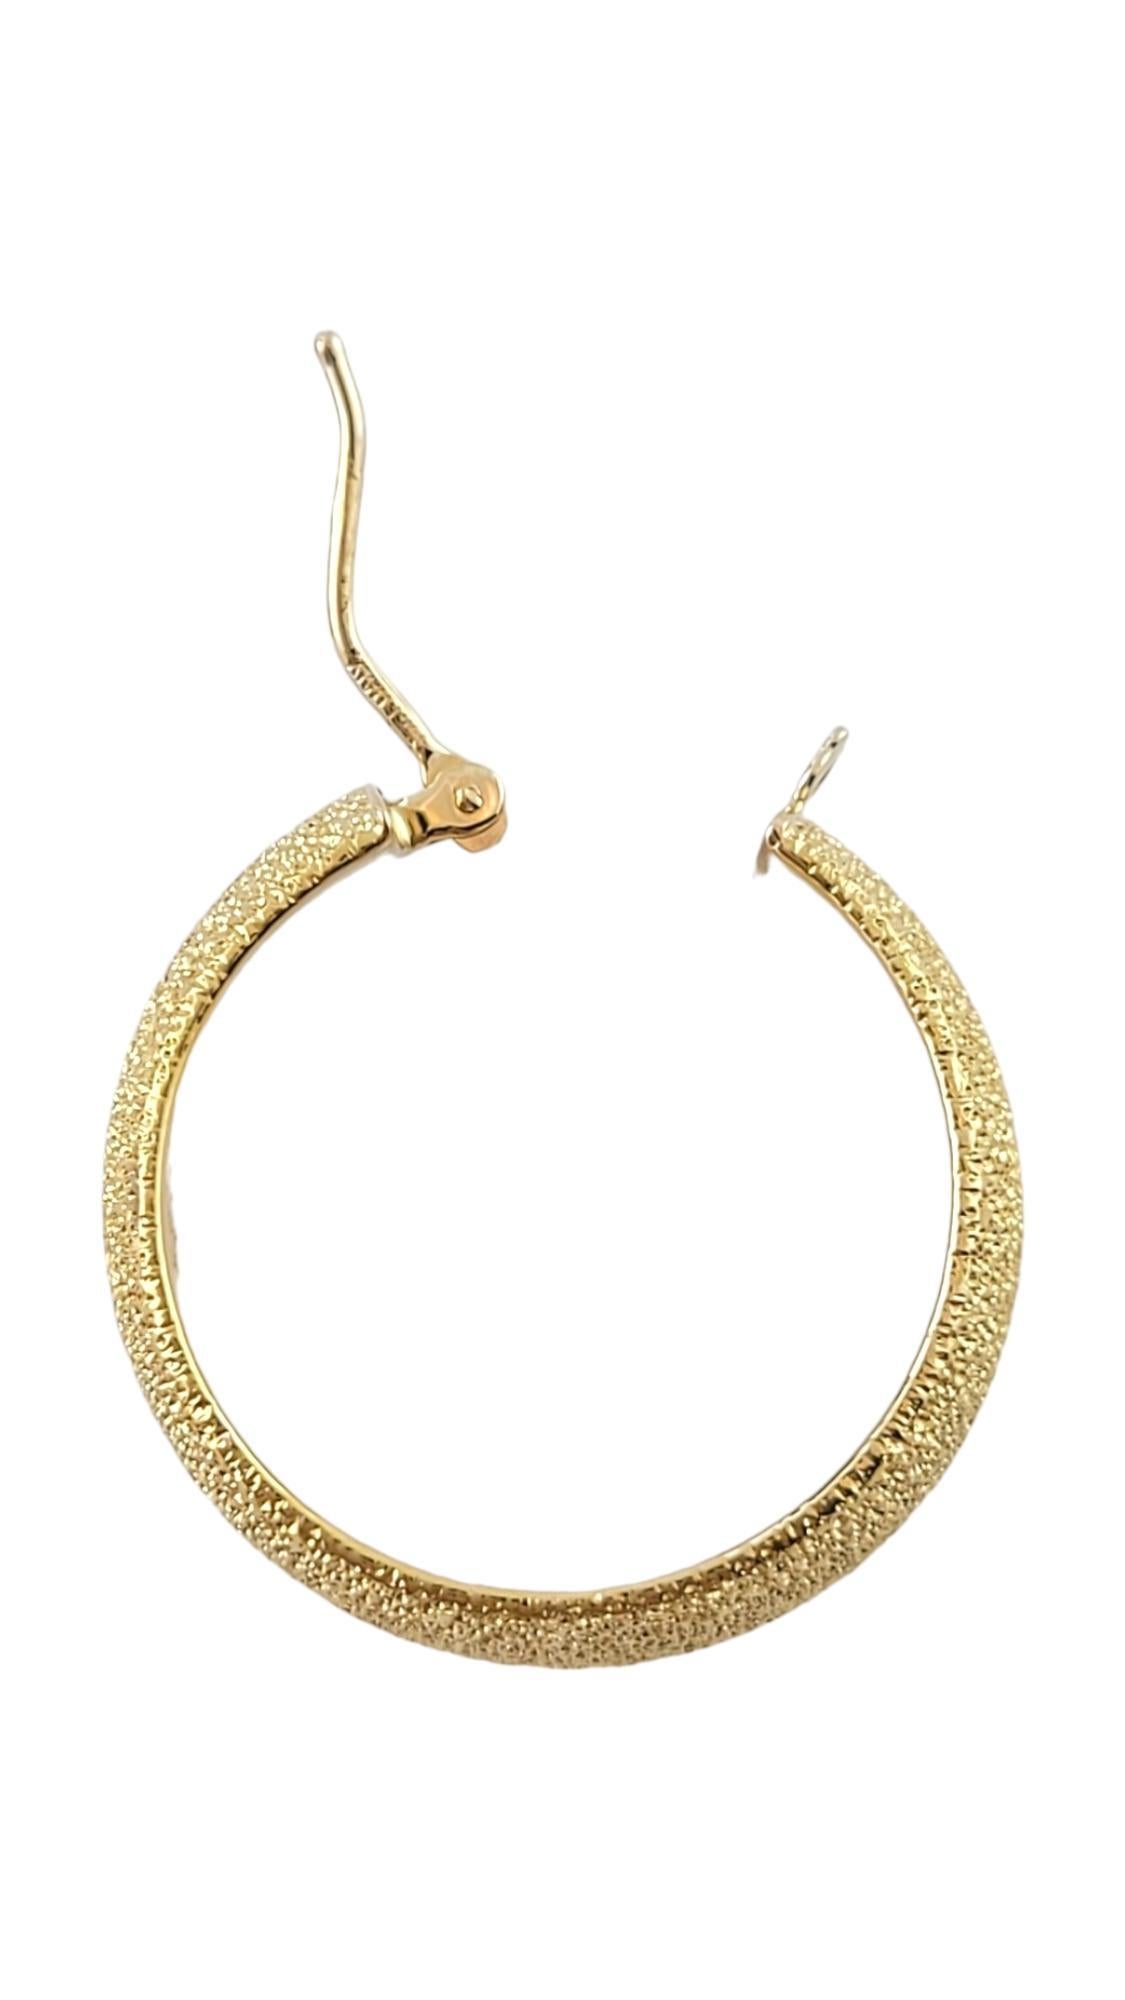 Women's 14K Yellow Gold Textured Sparkly Hoop Earrings #17378 For Sale